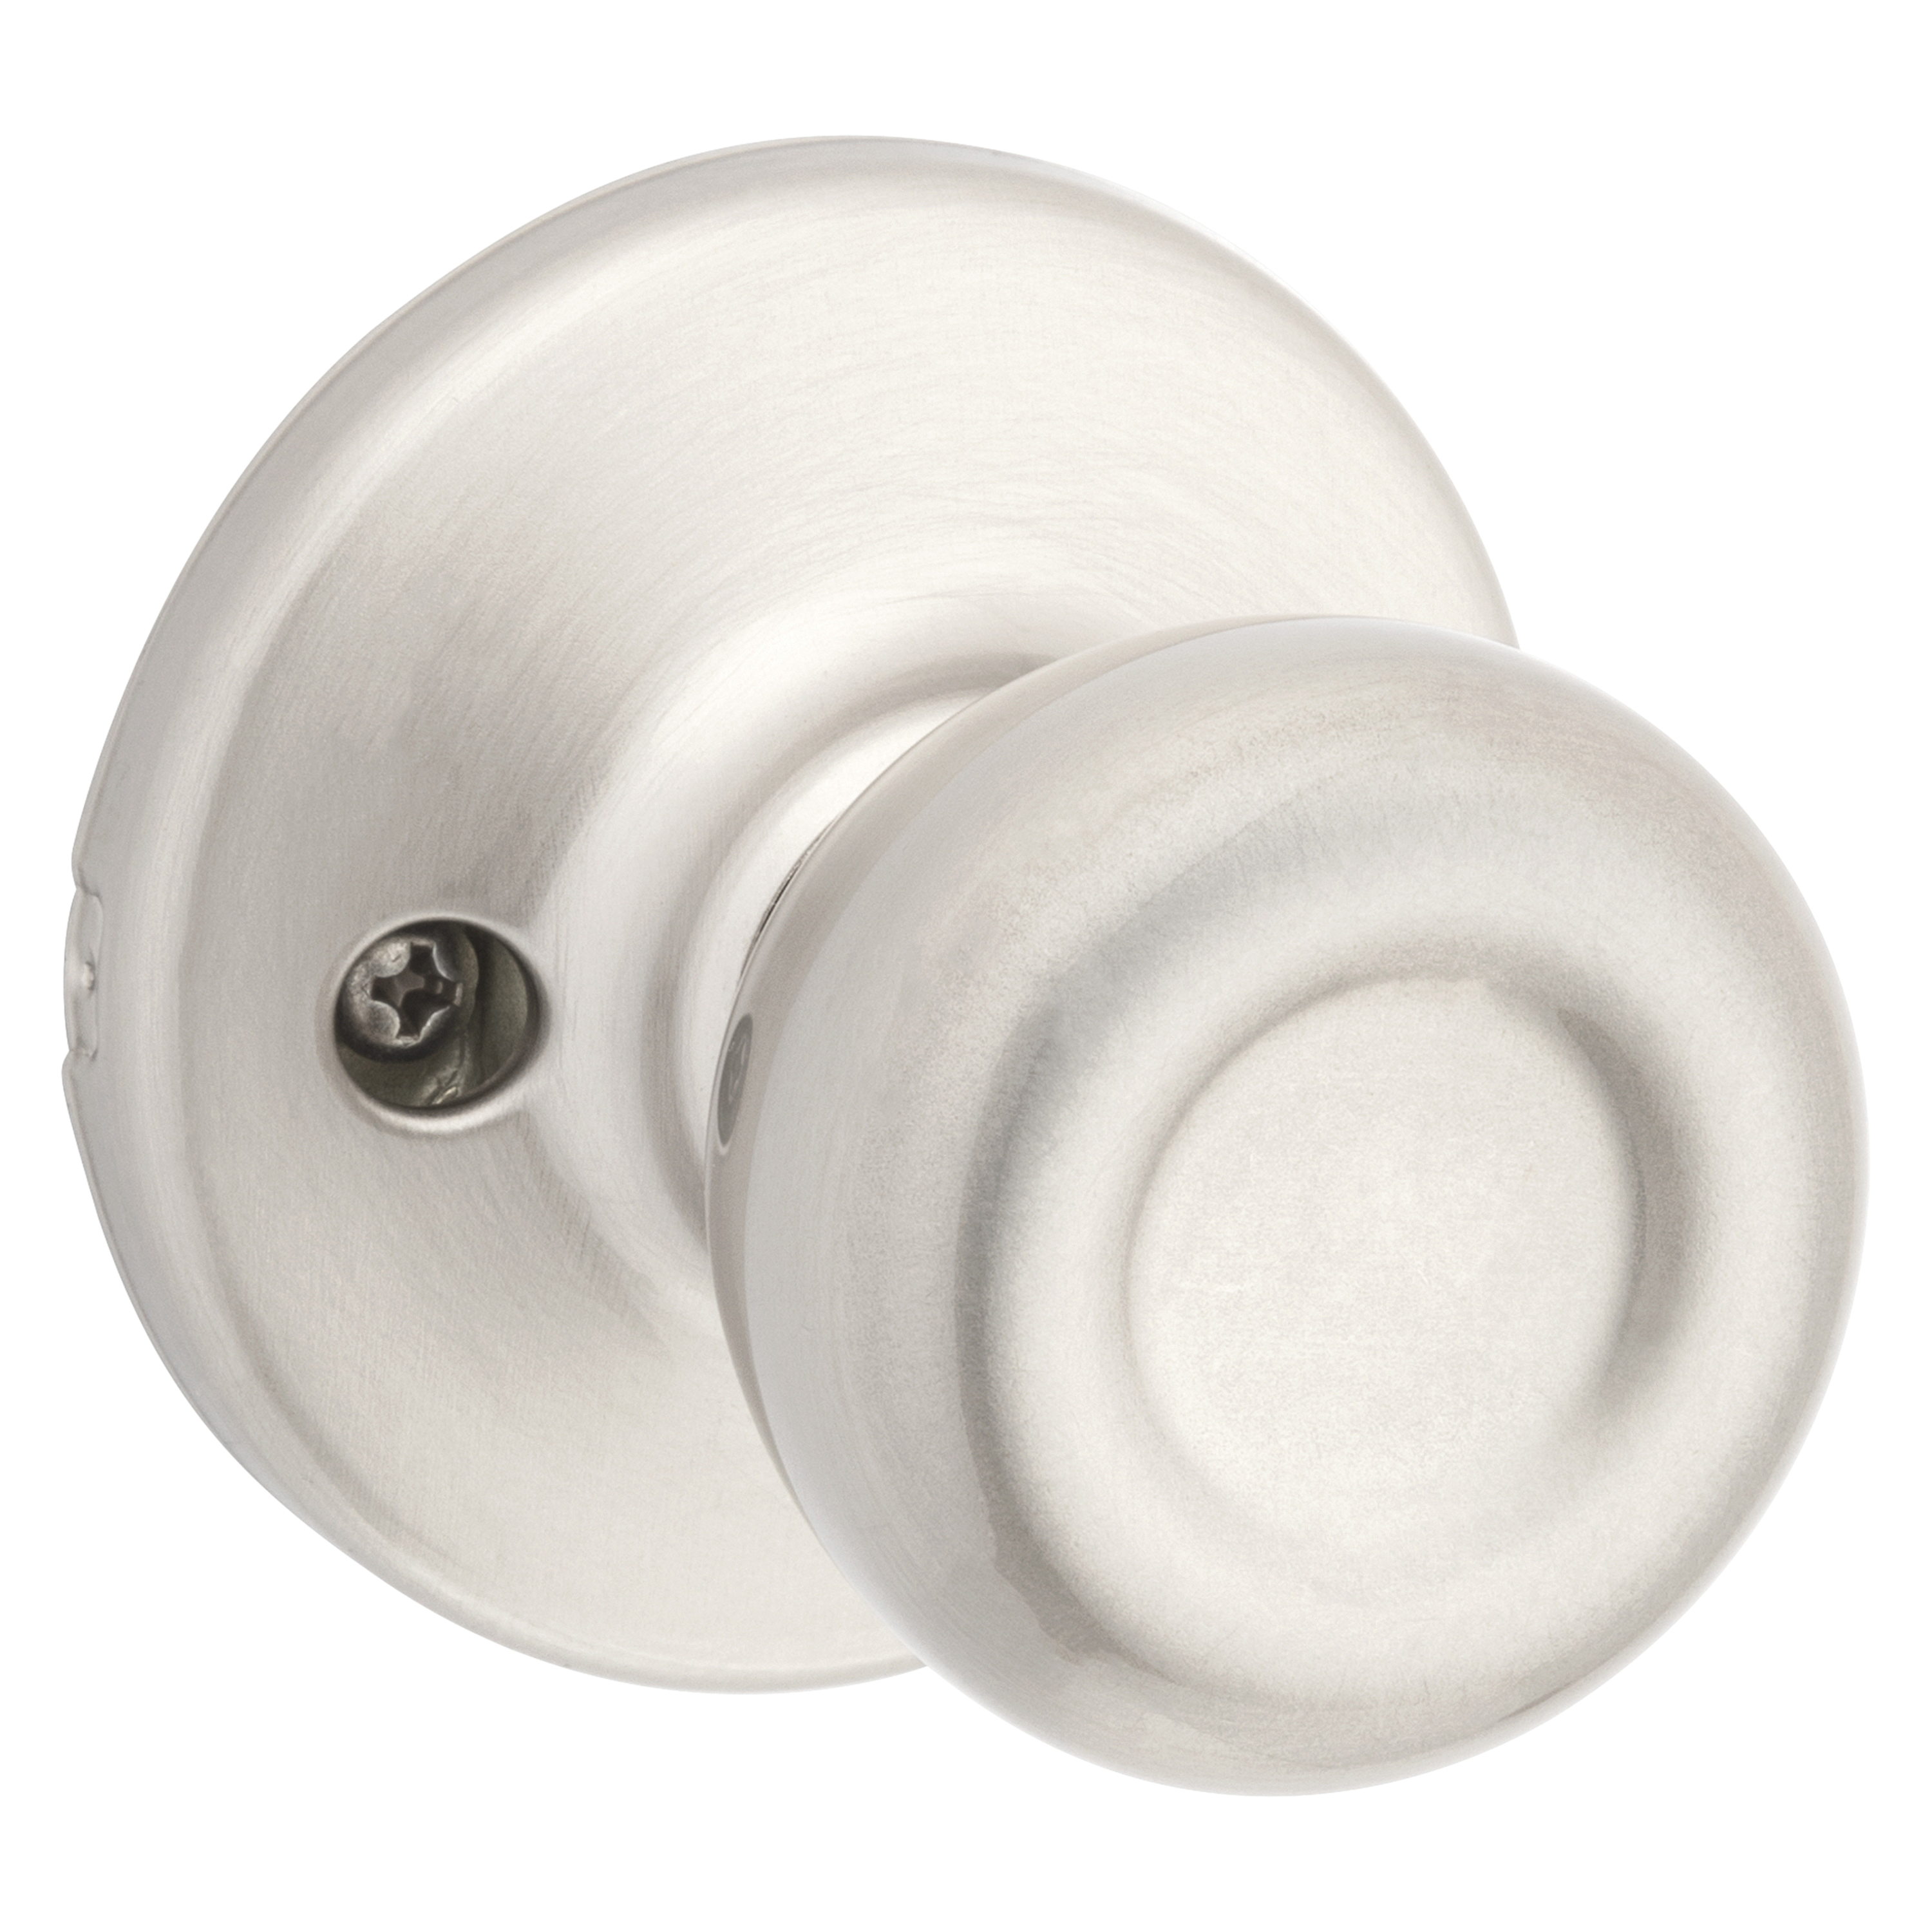 Kwikset 488T 15 CP Dummy Knob, Satin Nickel, For: Both Right Handed and Left Handed Doors